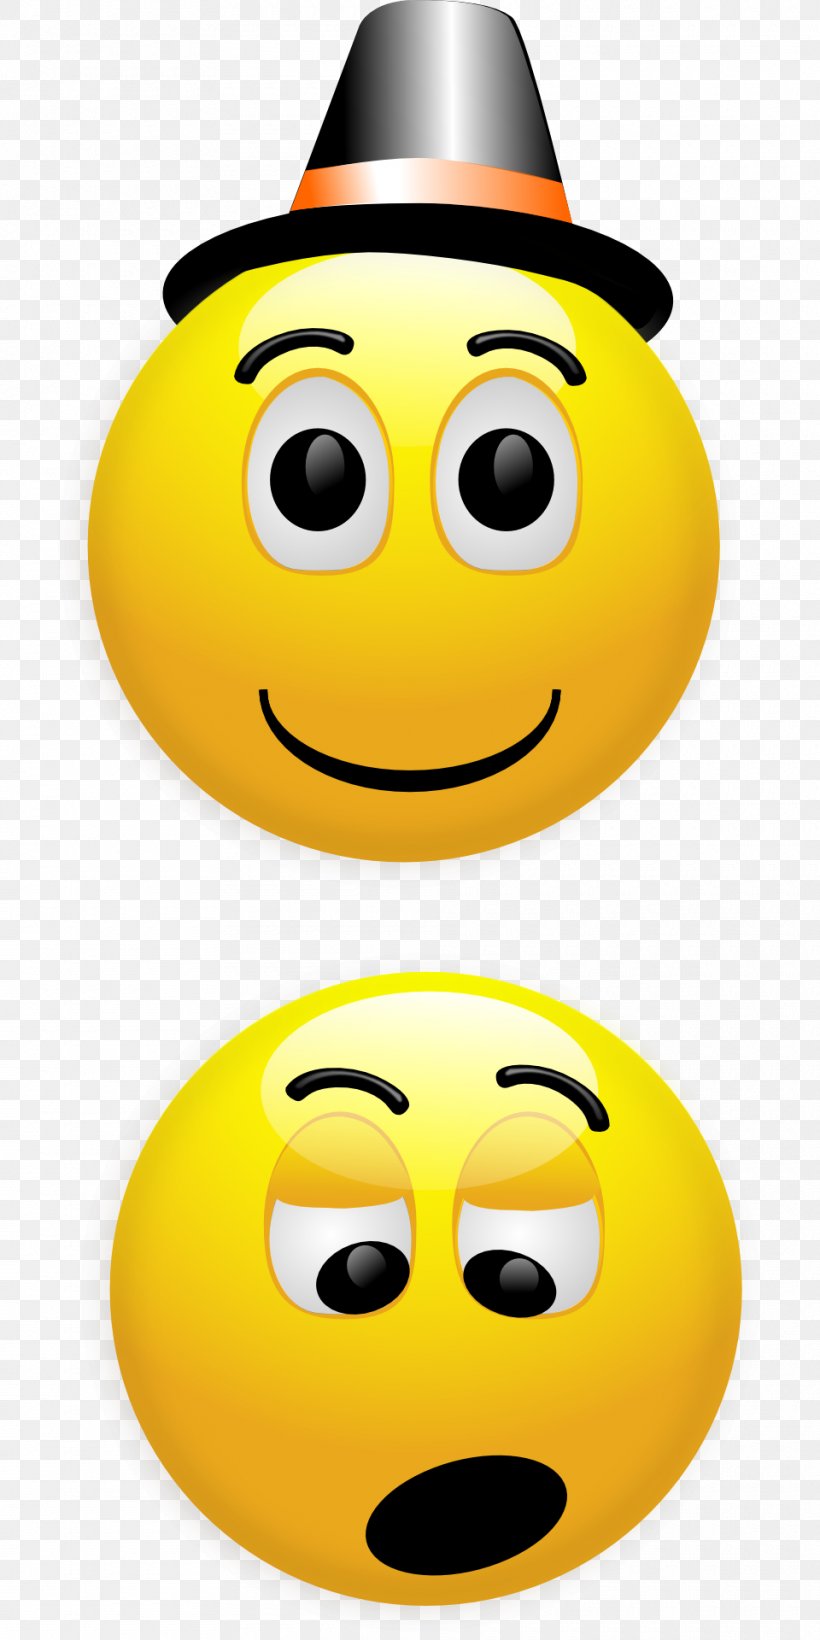 Smiley Emoticon Clip Art, PNG, 960x1920px, Smiley, Emoticon, Face, Happiness, Laughter Download Free